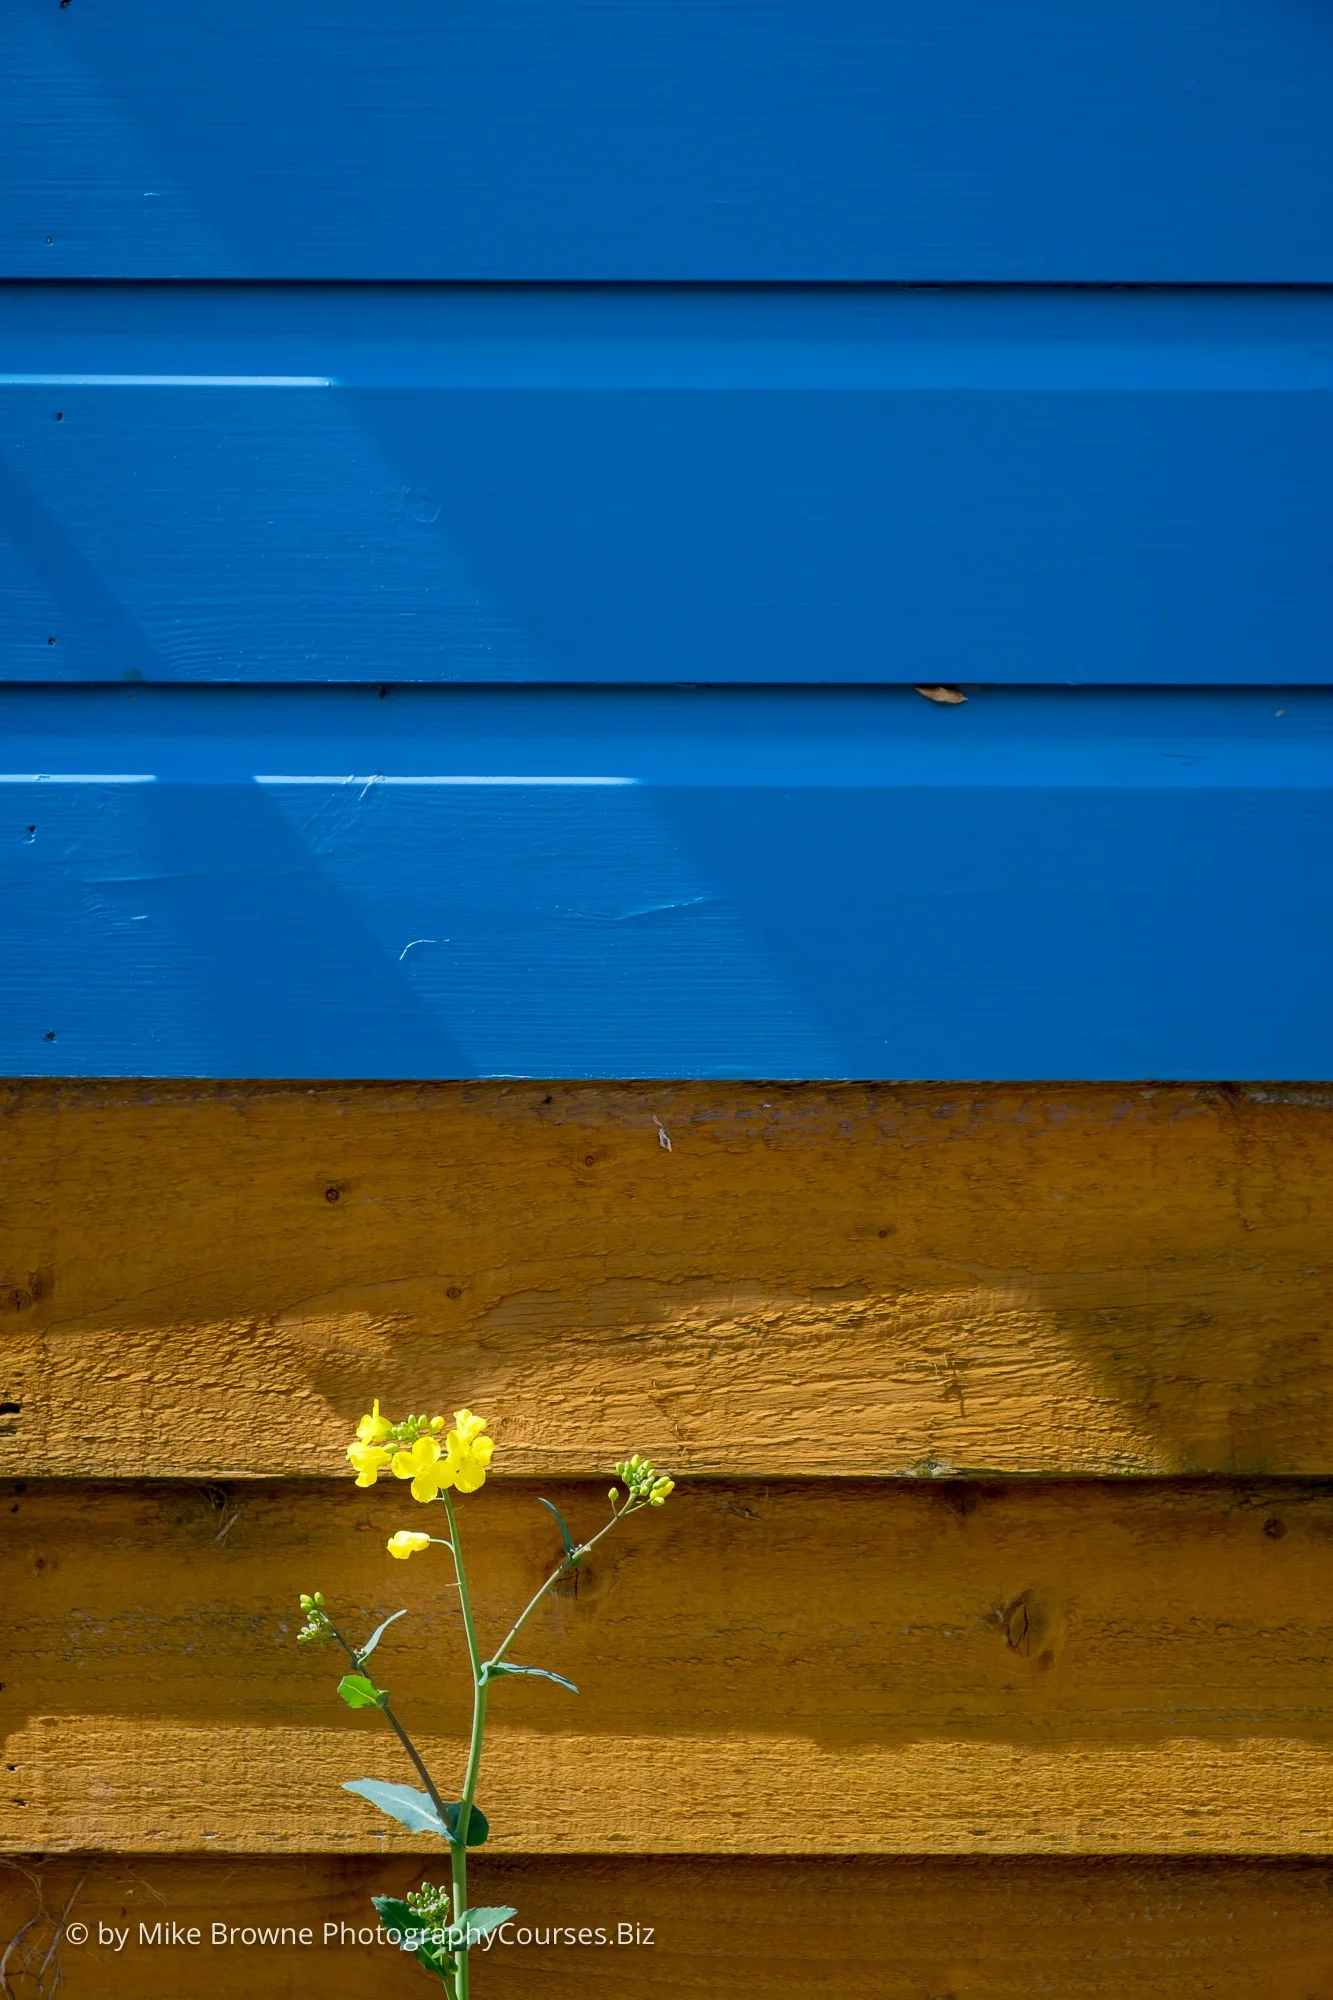 Yellow flower by a plain and blue painted wall in sunshine